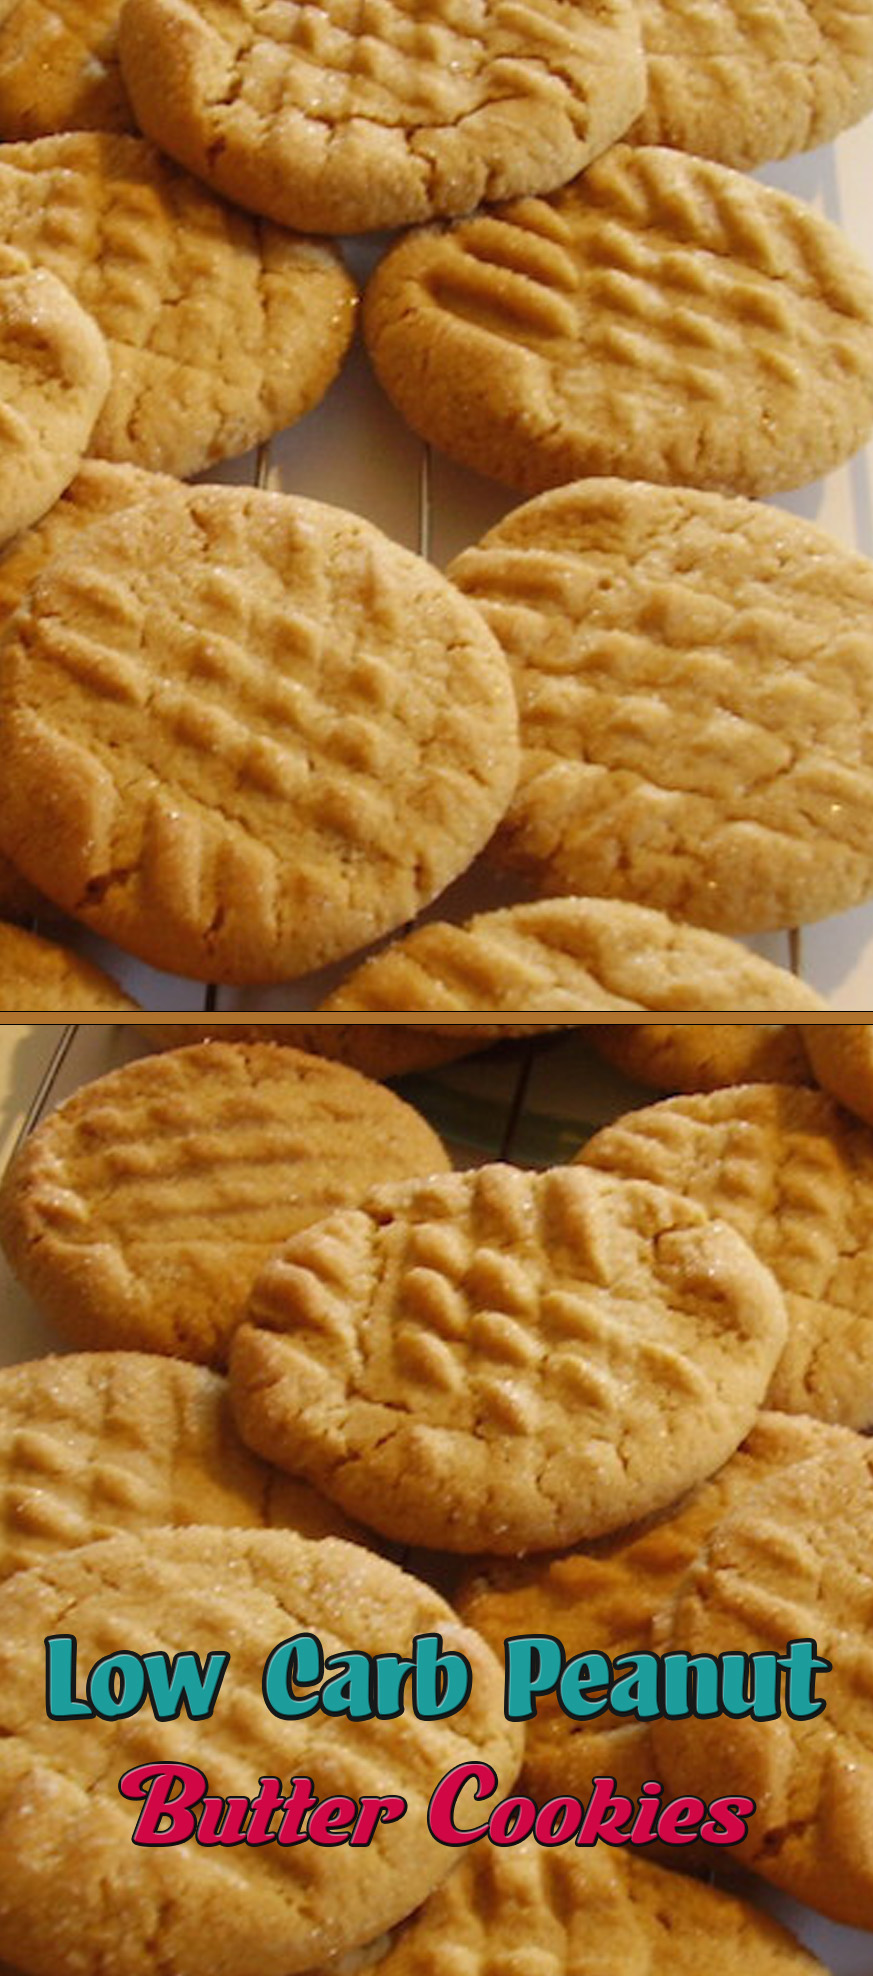 Low Carb Peanut Butter Cookies